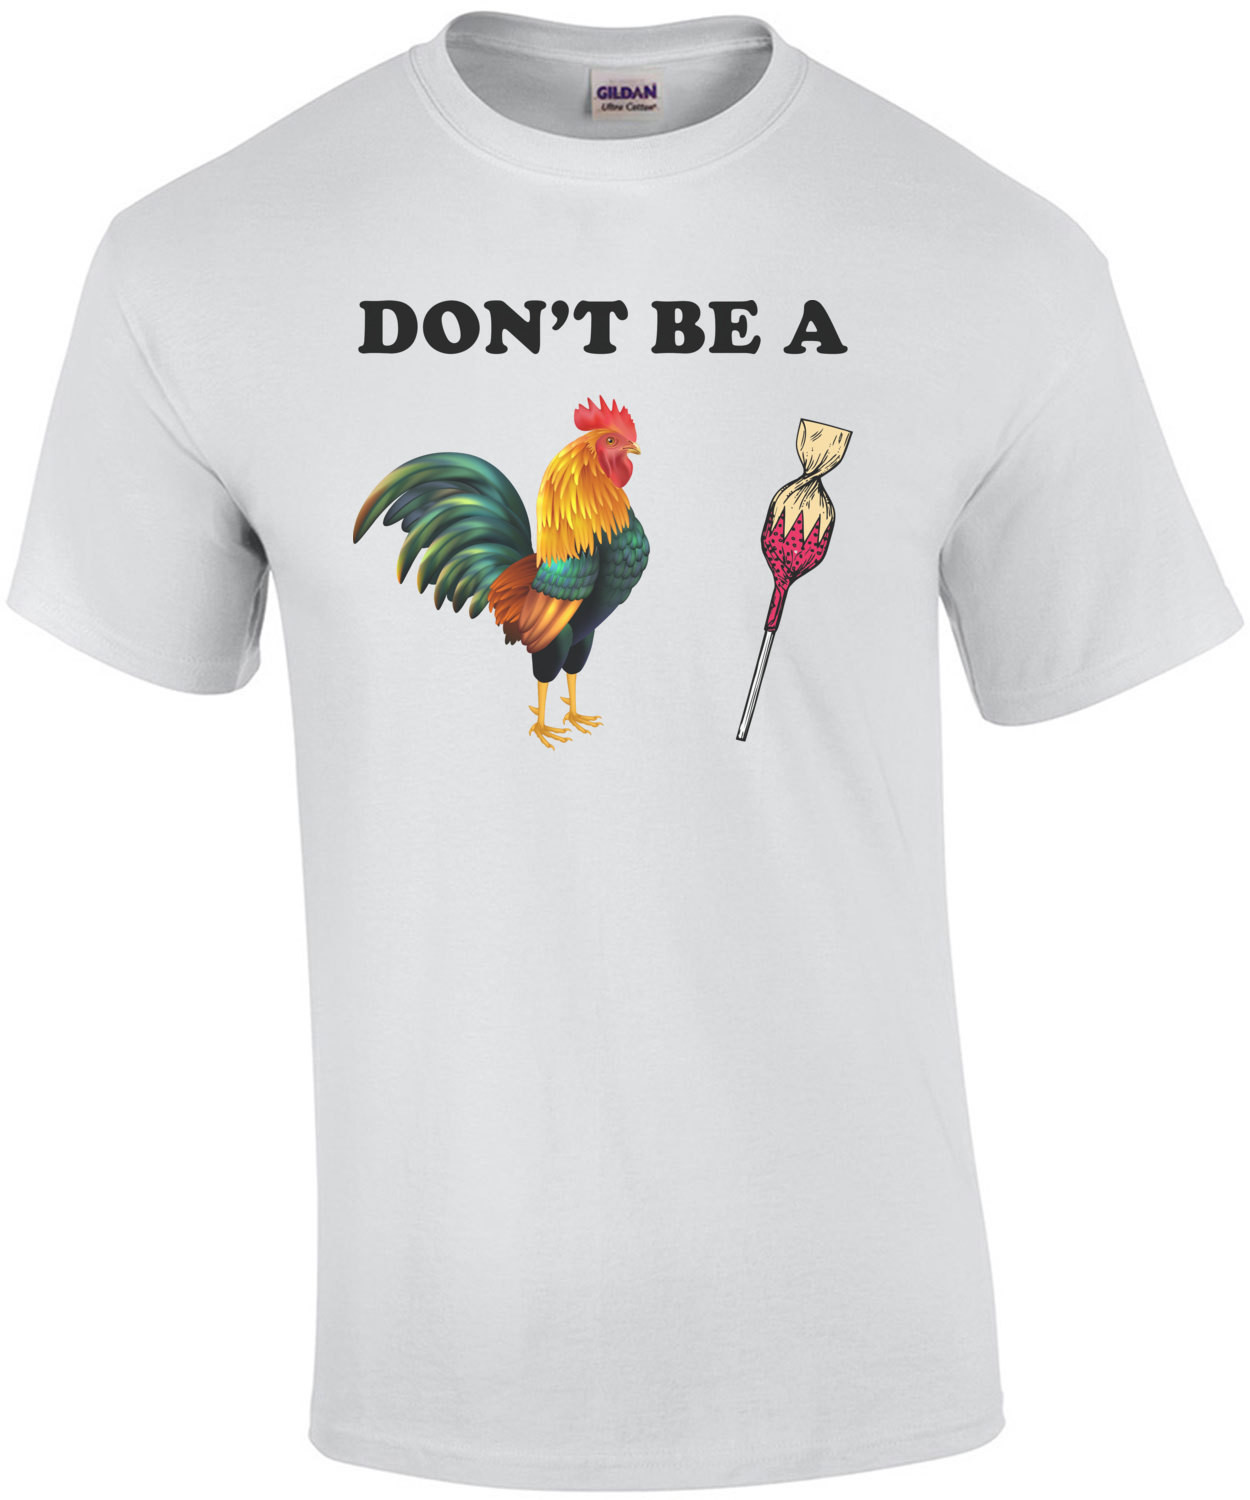 Don't Be a Cock Sucker Funny Shirt